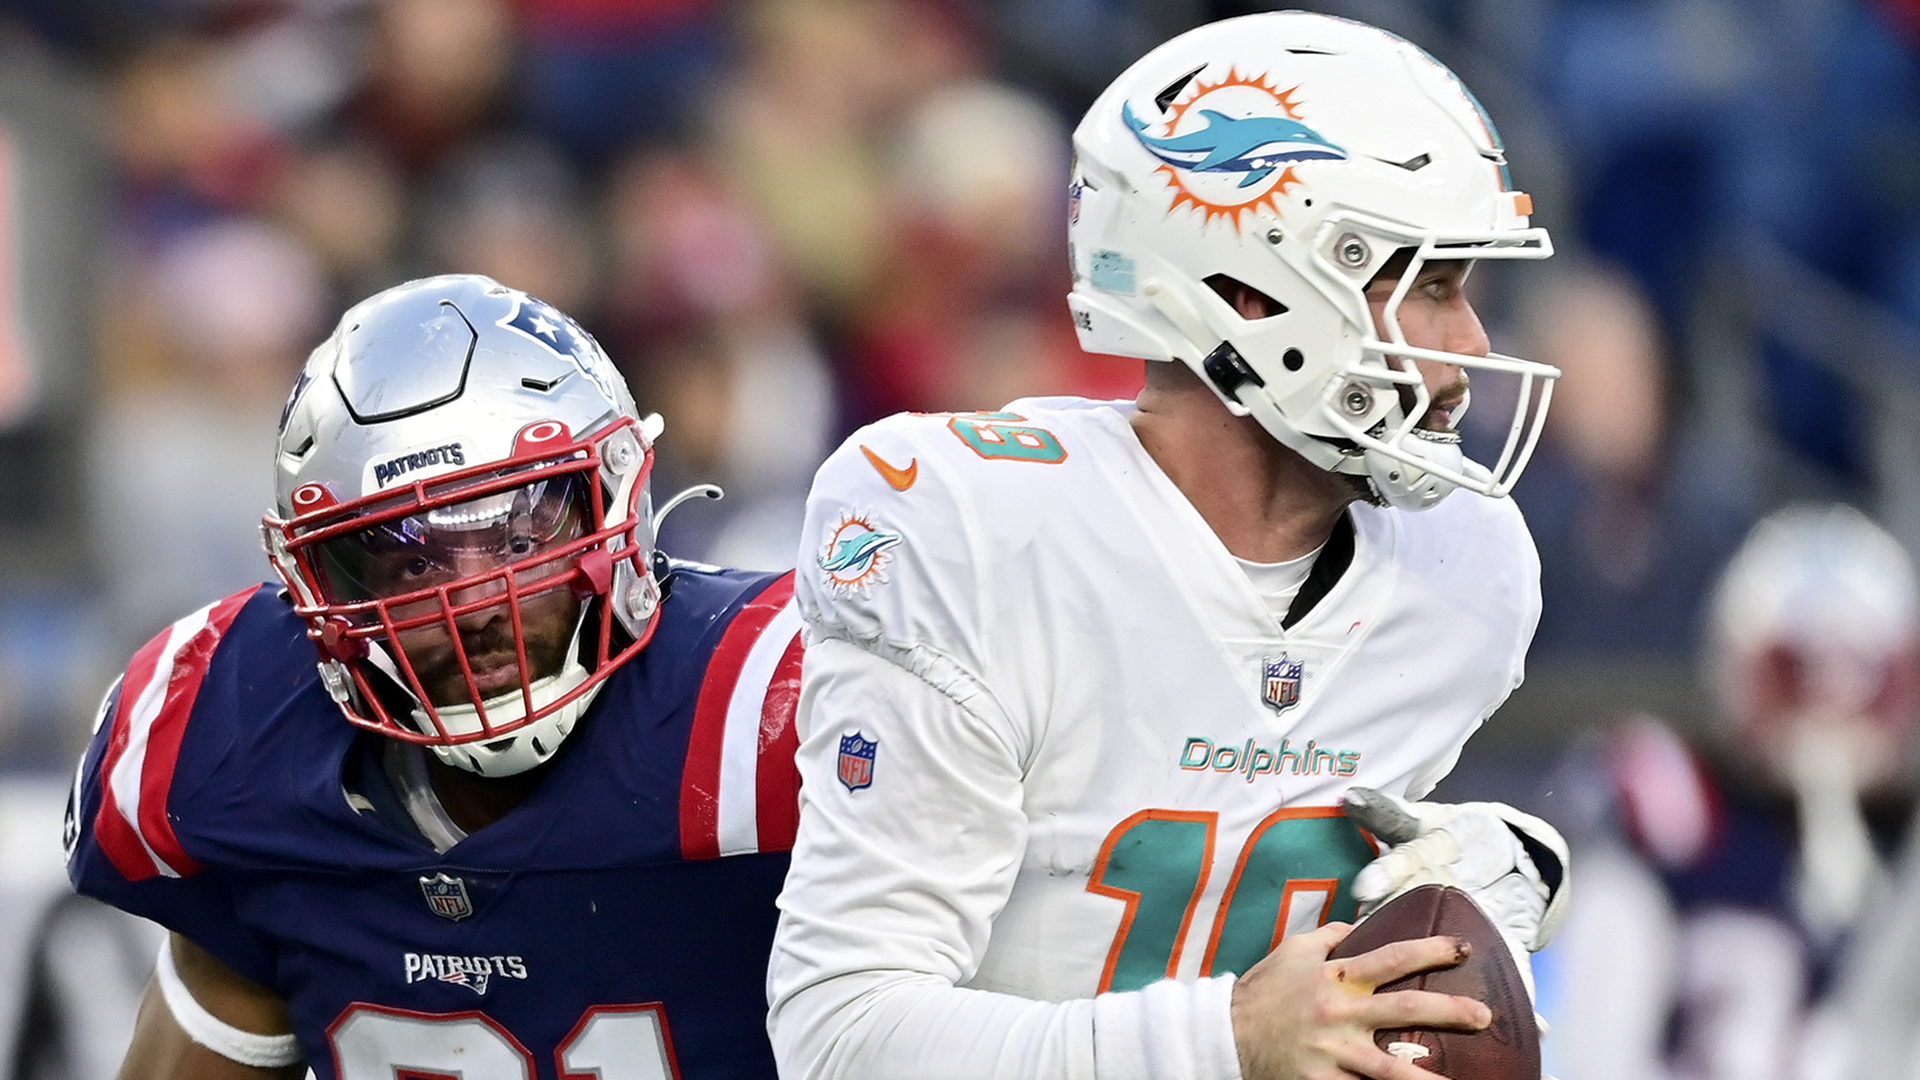 Dugger INT return helps lift Pats over fading Dolphins 23-21